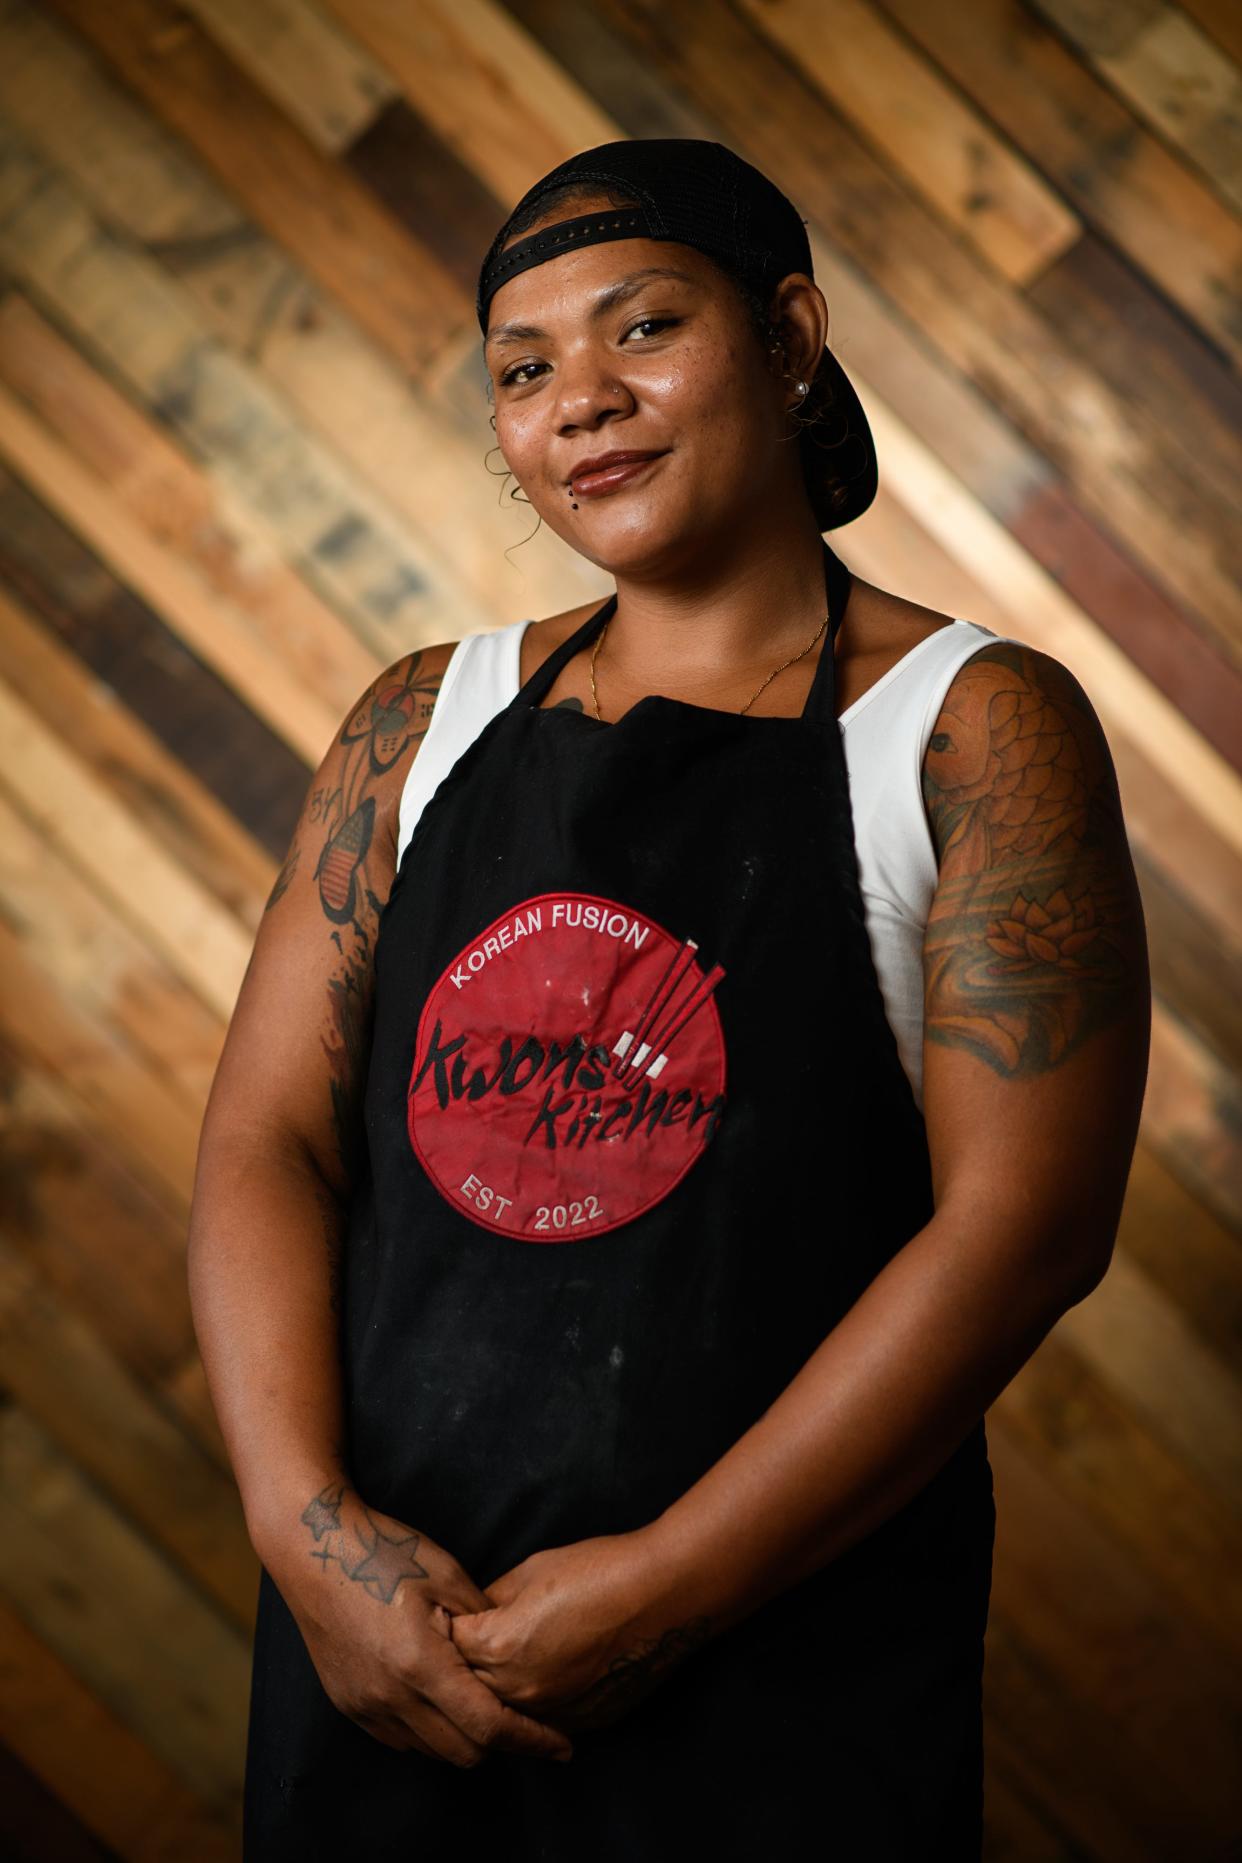 Vanessa Mckoy, owner of Kwon's Kitchen Korean Fusion at 5173 Bragg Blvd., plans to team up with the owner of the former PJ Thai Cuisine, Pornjai Smith, to offer Thai appetizers, main dishes and drinks.